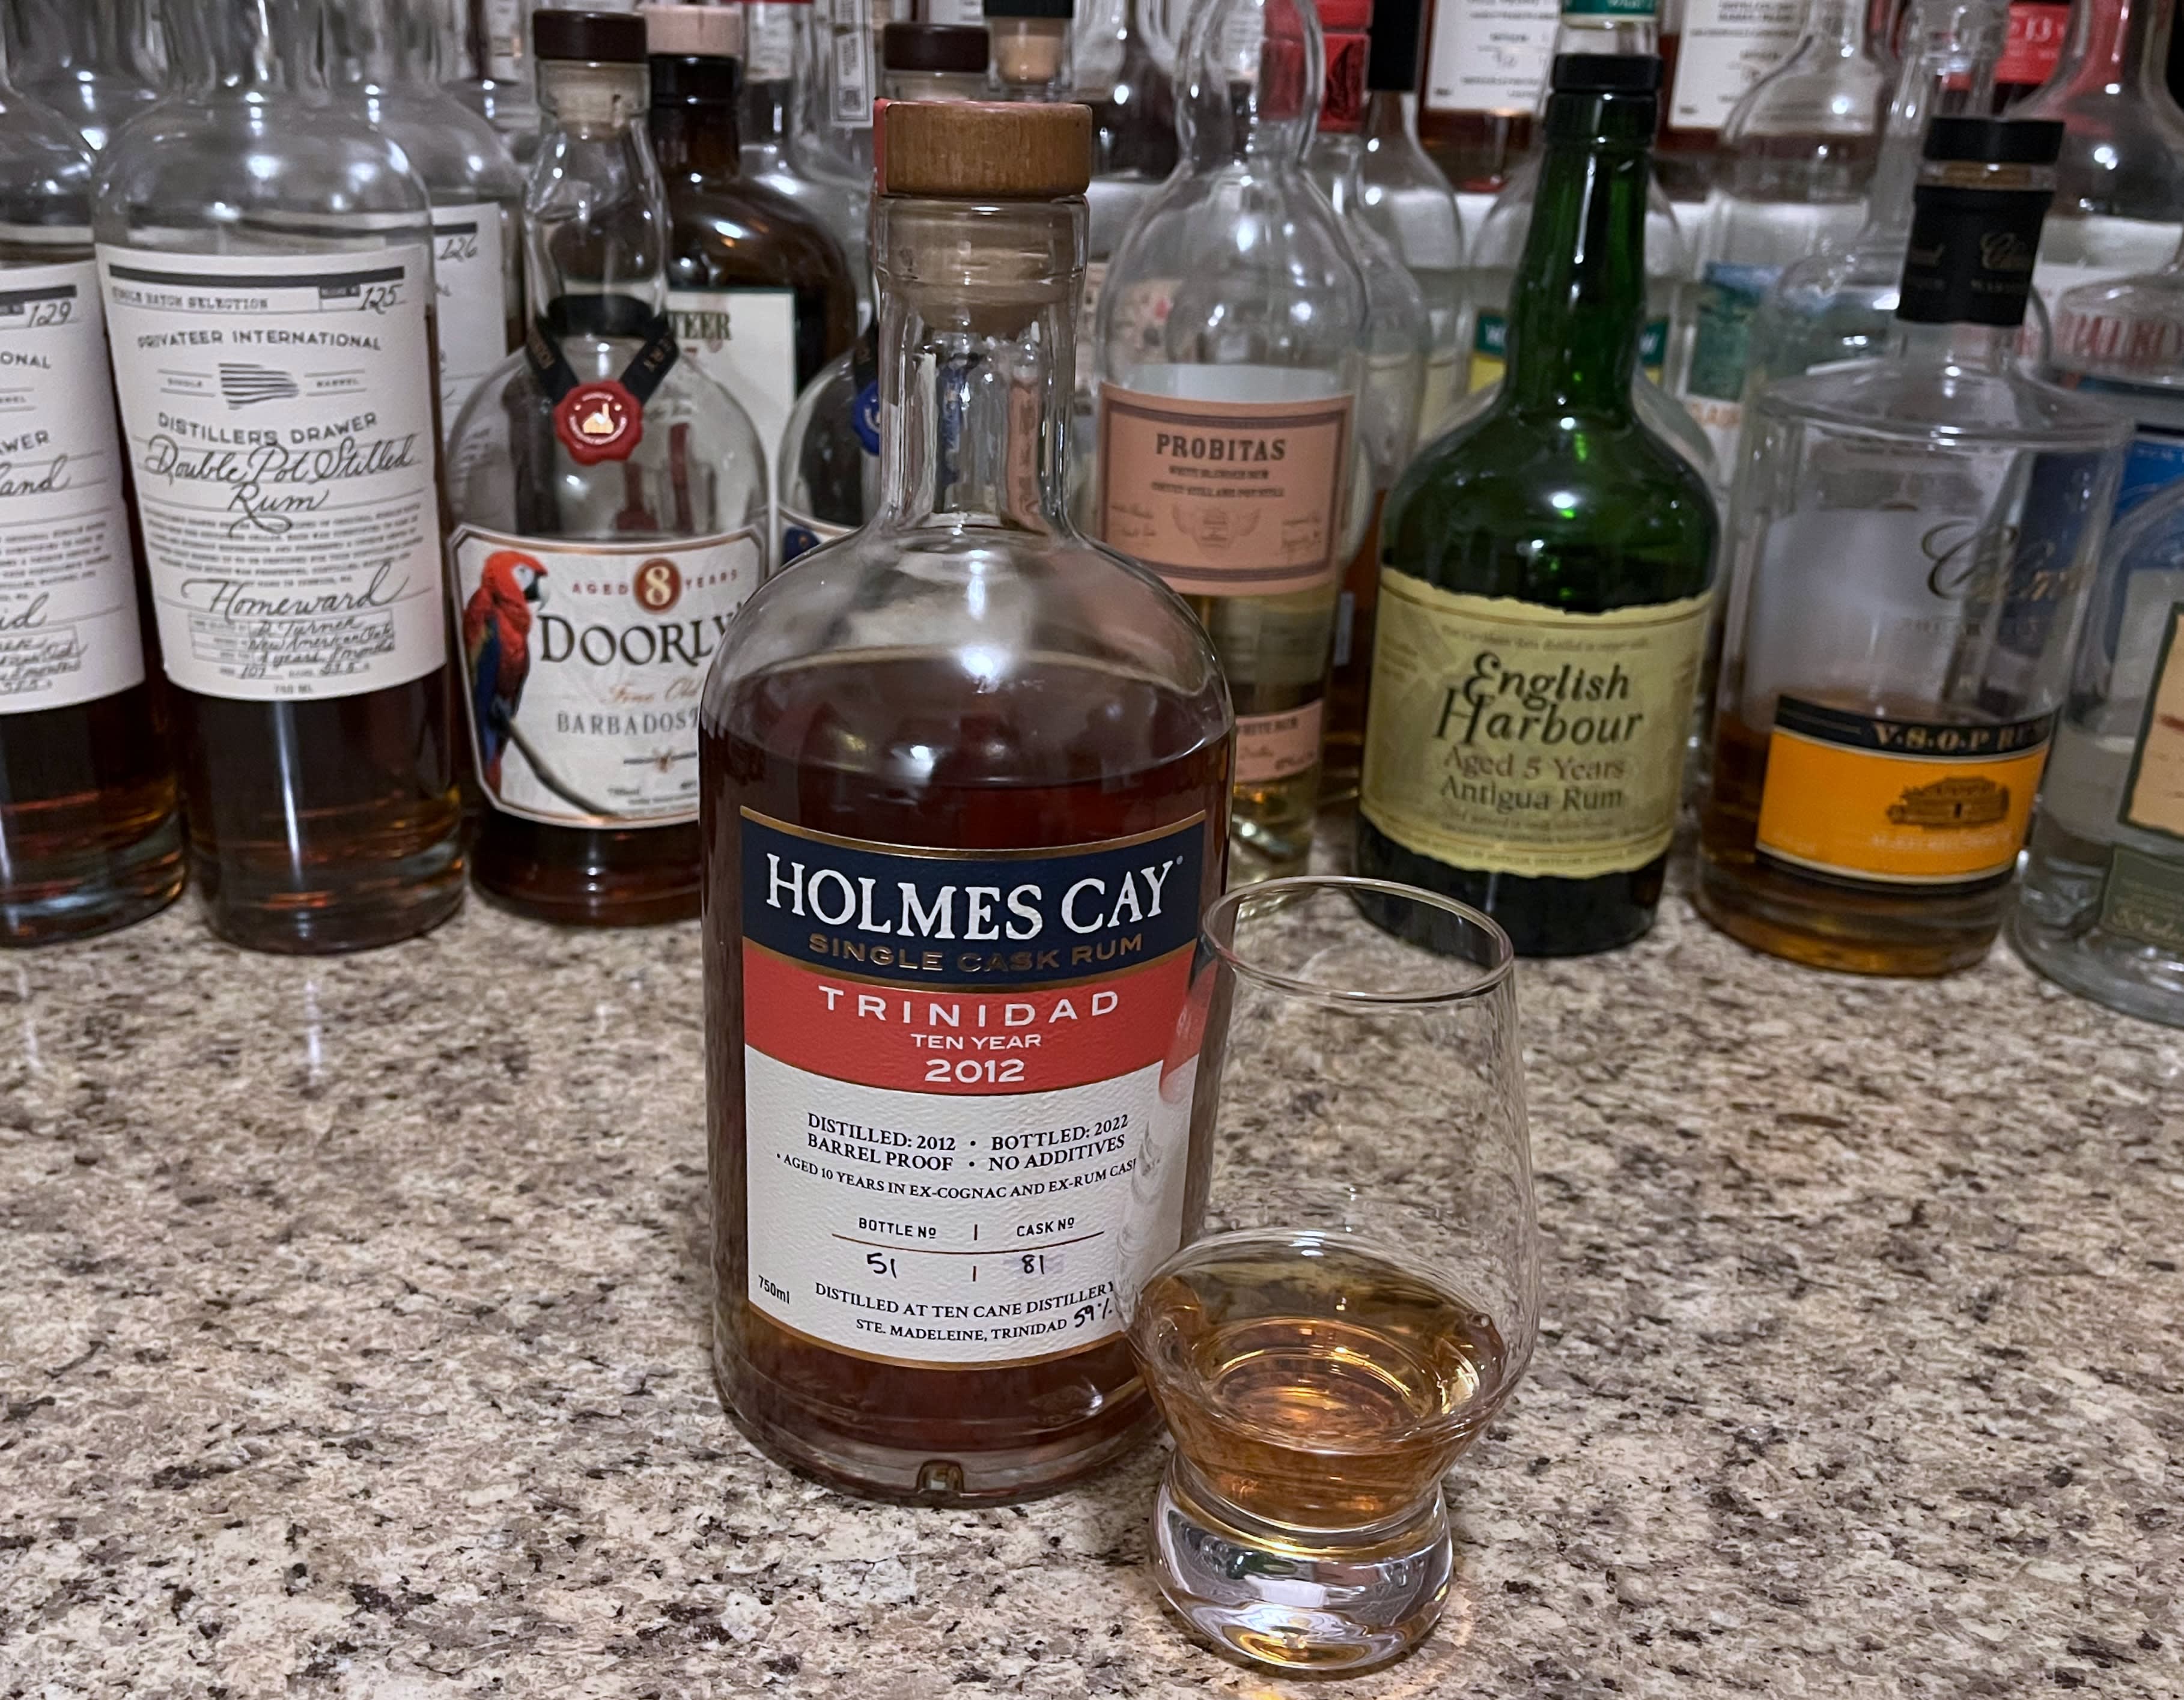 Bottle of Holmes Cay Trinidad 2012 sitting next to a rum-filled glencairn